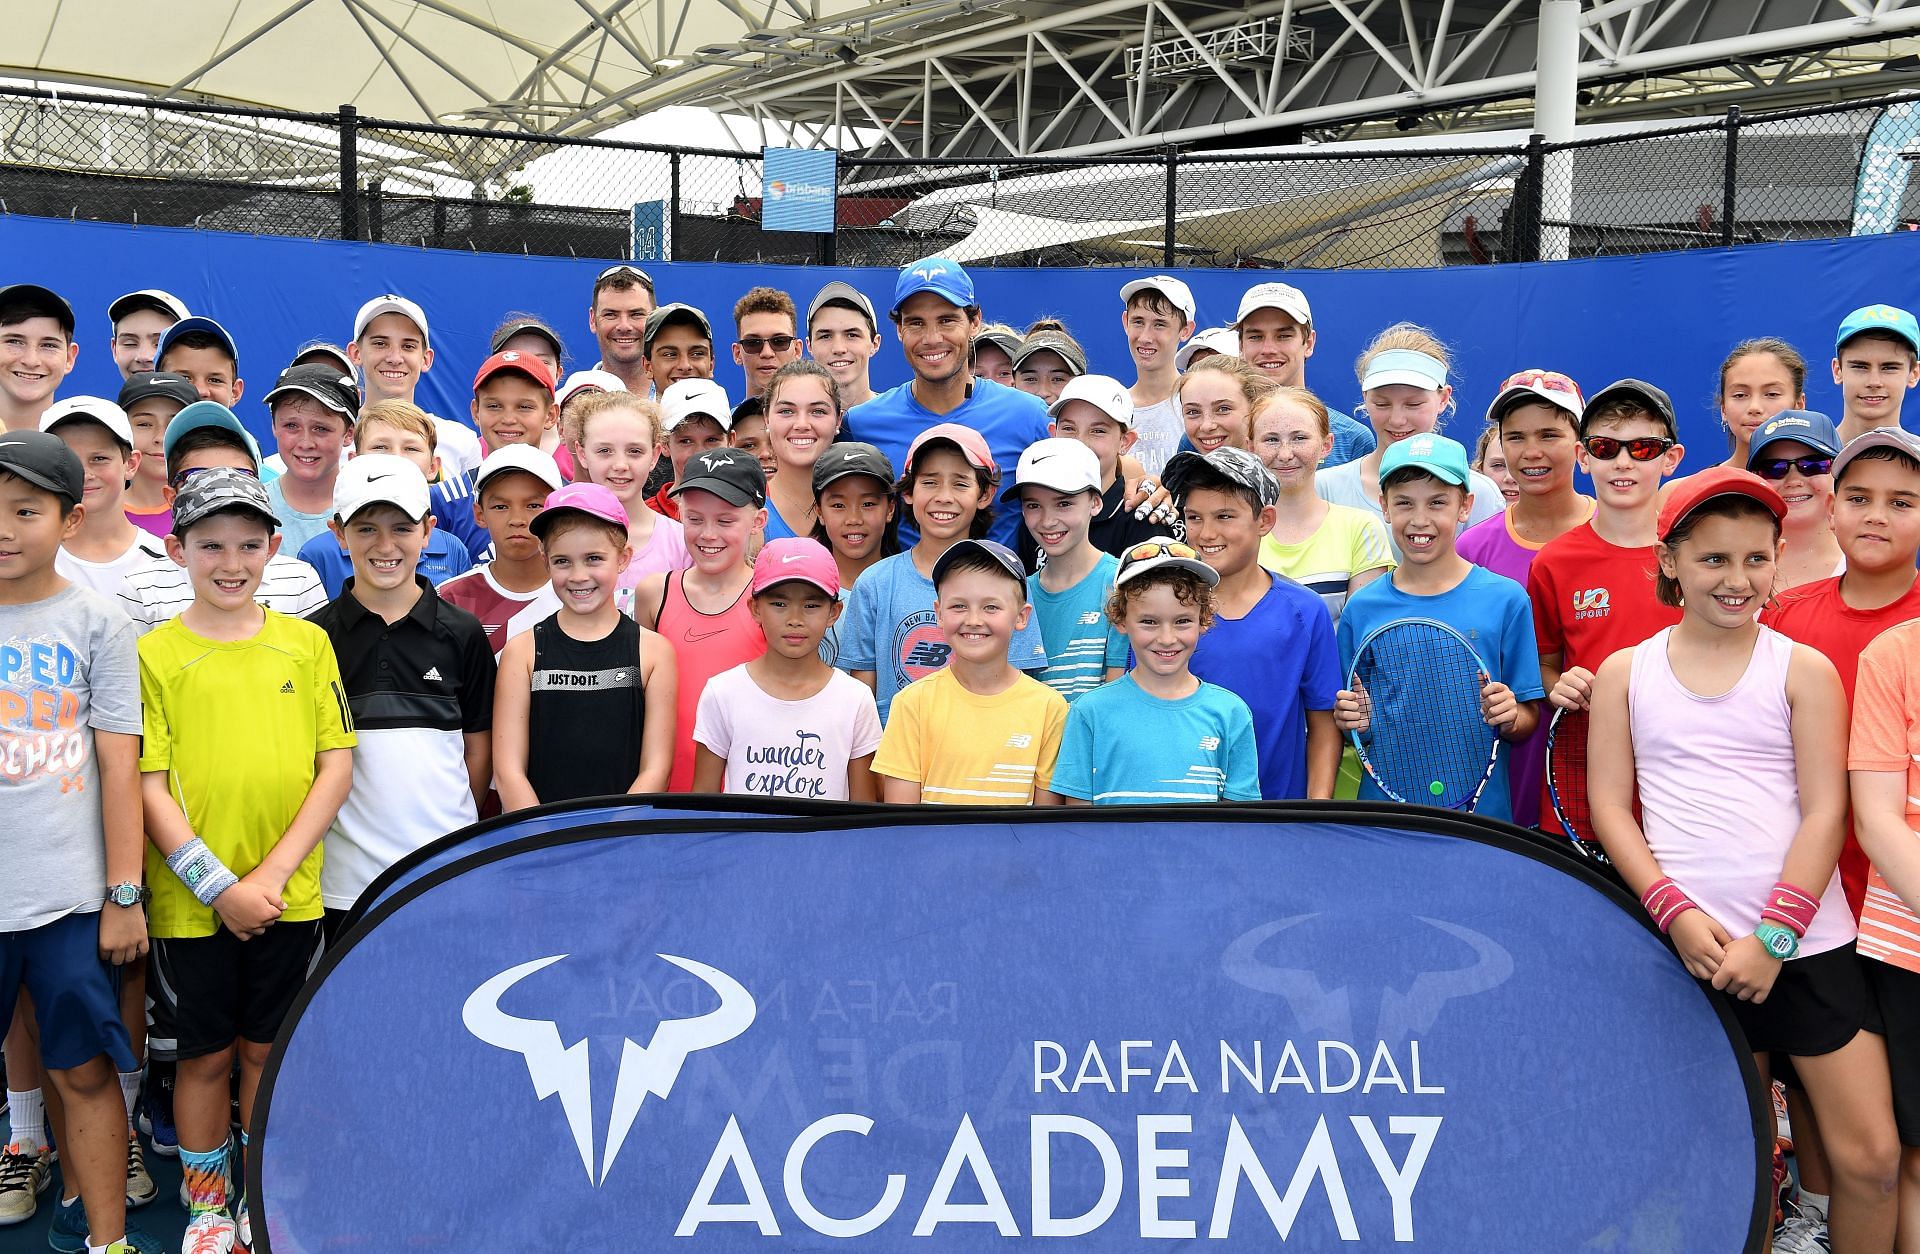 Students from Rafa Nadal Academy have been producing excellent results